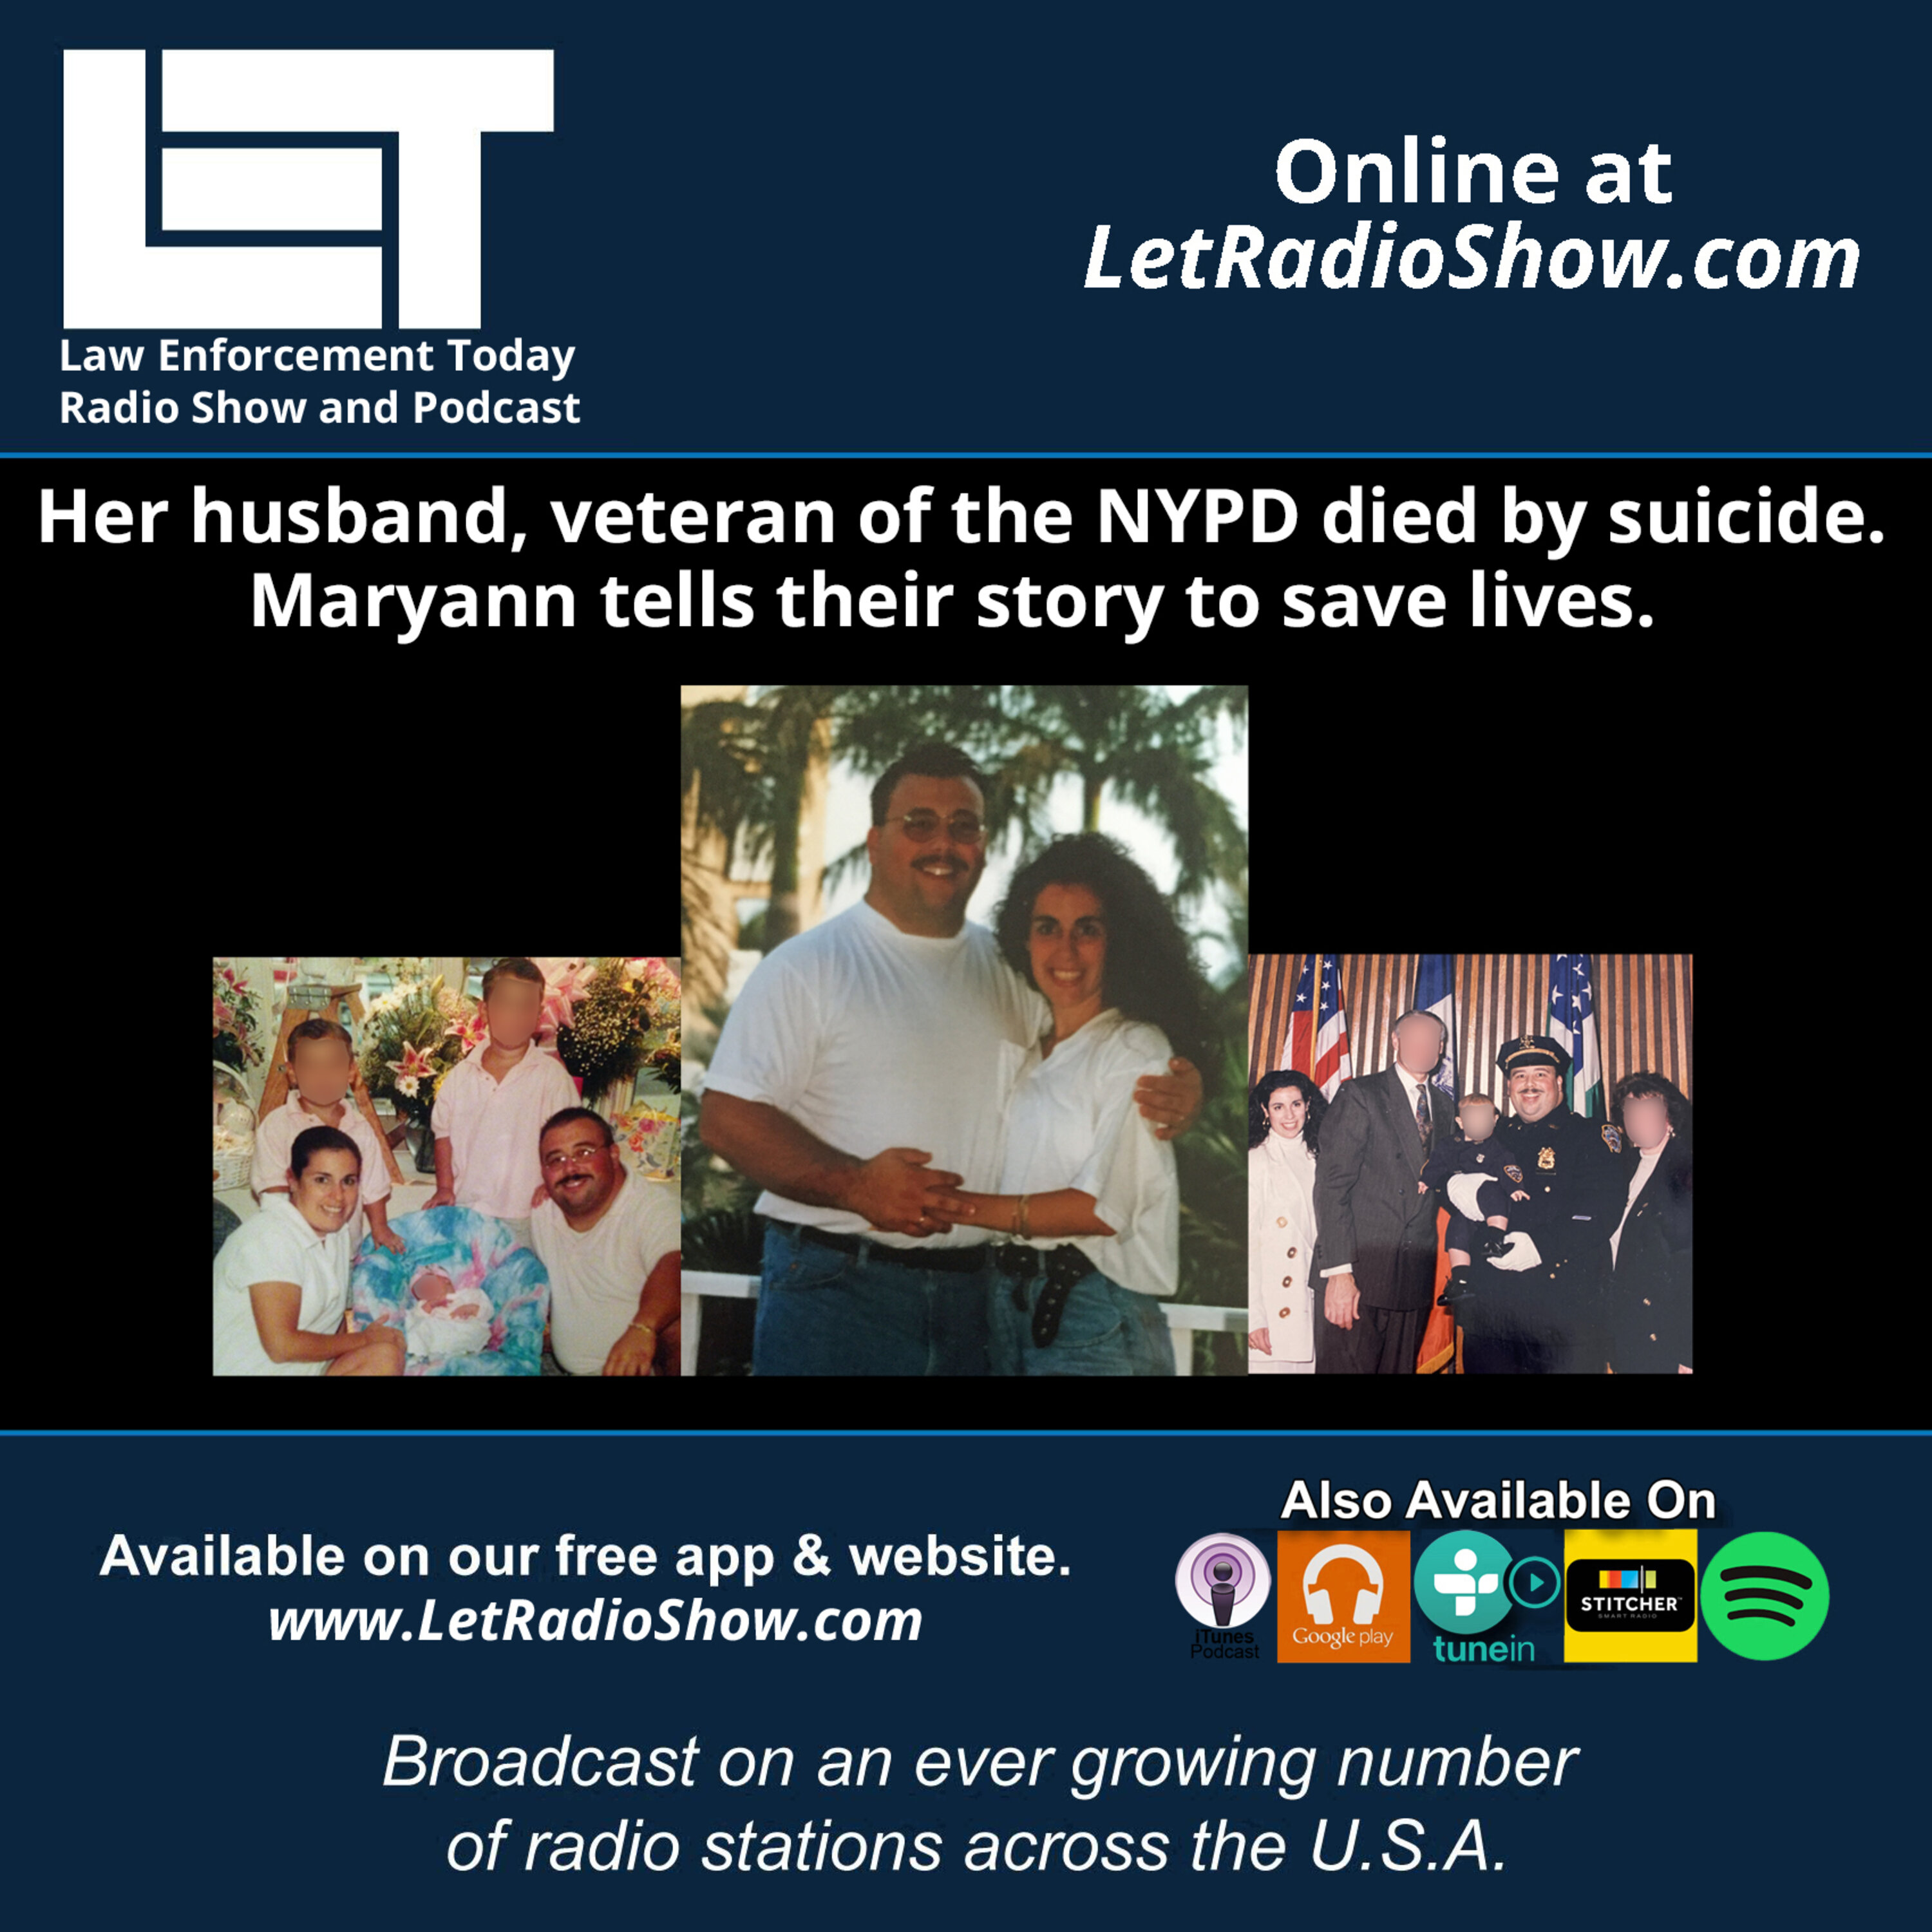 S5E42: Her husband, veteran of the NYPD died by suicide.  MaryAnn tells their story to save lives.